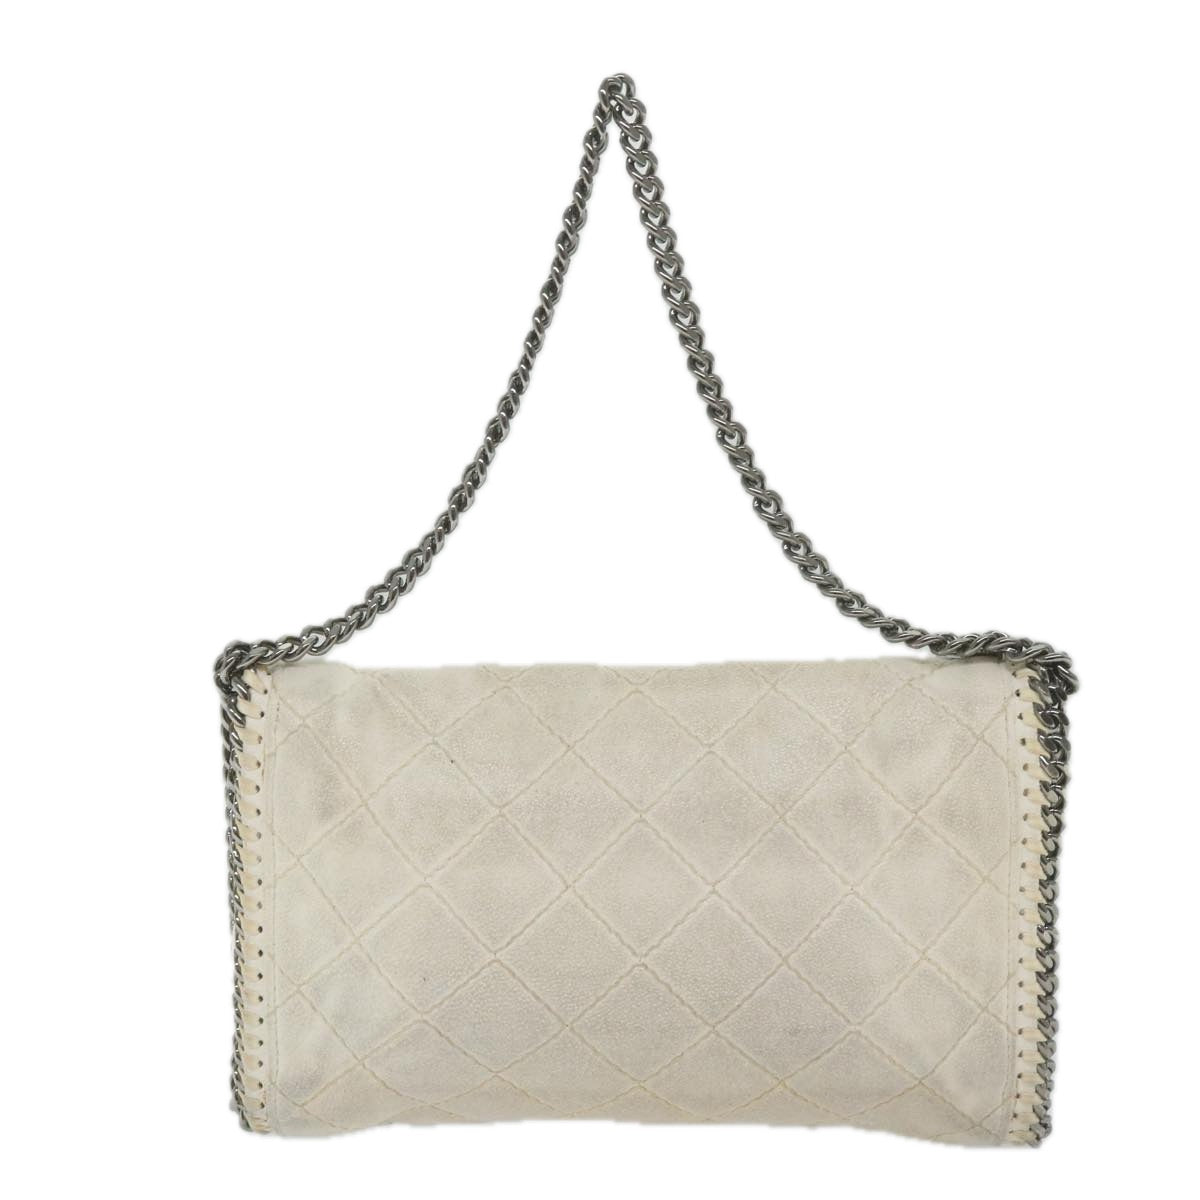 Stella MacCartney Chain Falabella Shoulder Bag Polyester White Auth bs10215 - 0